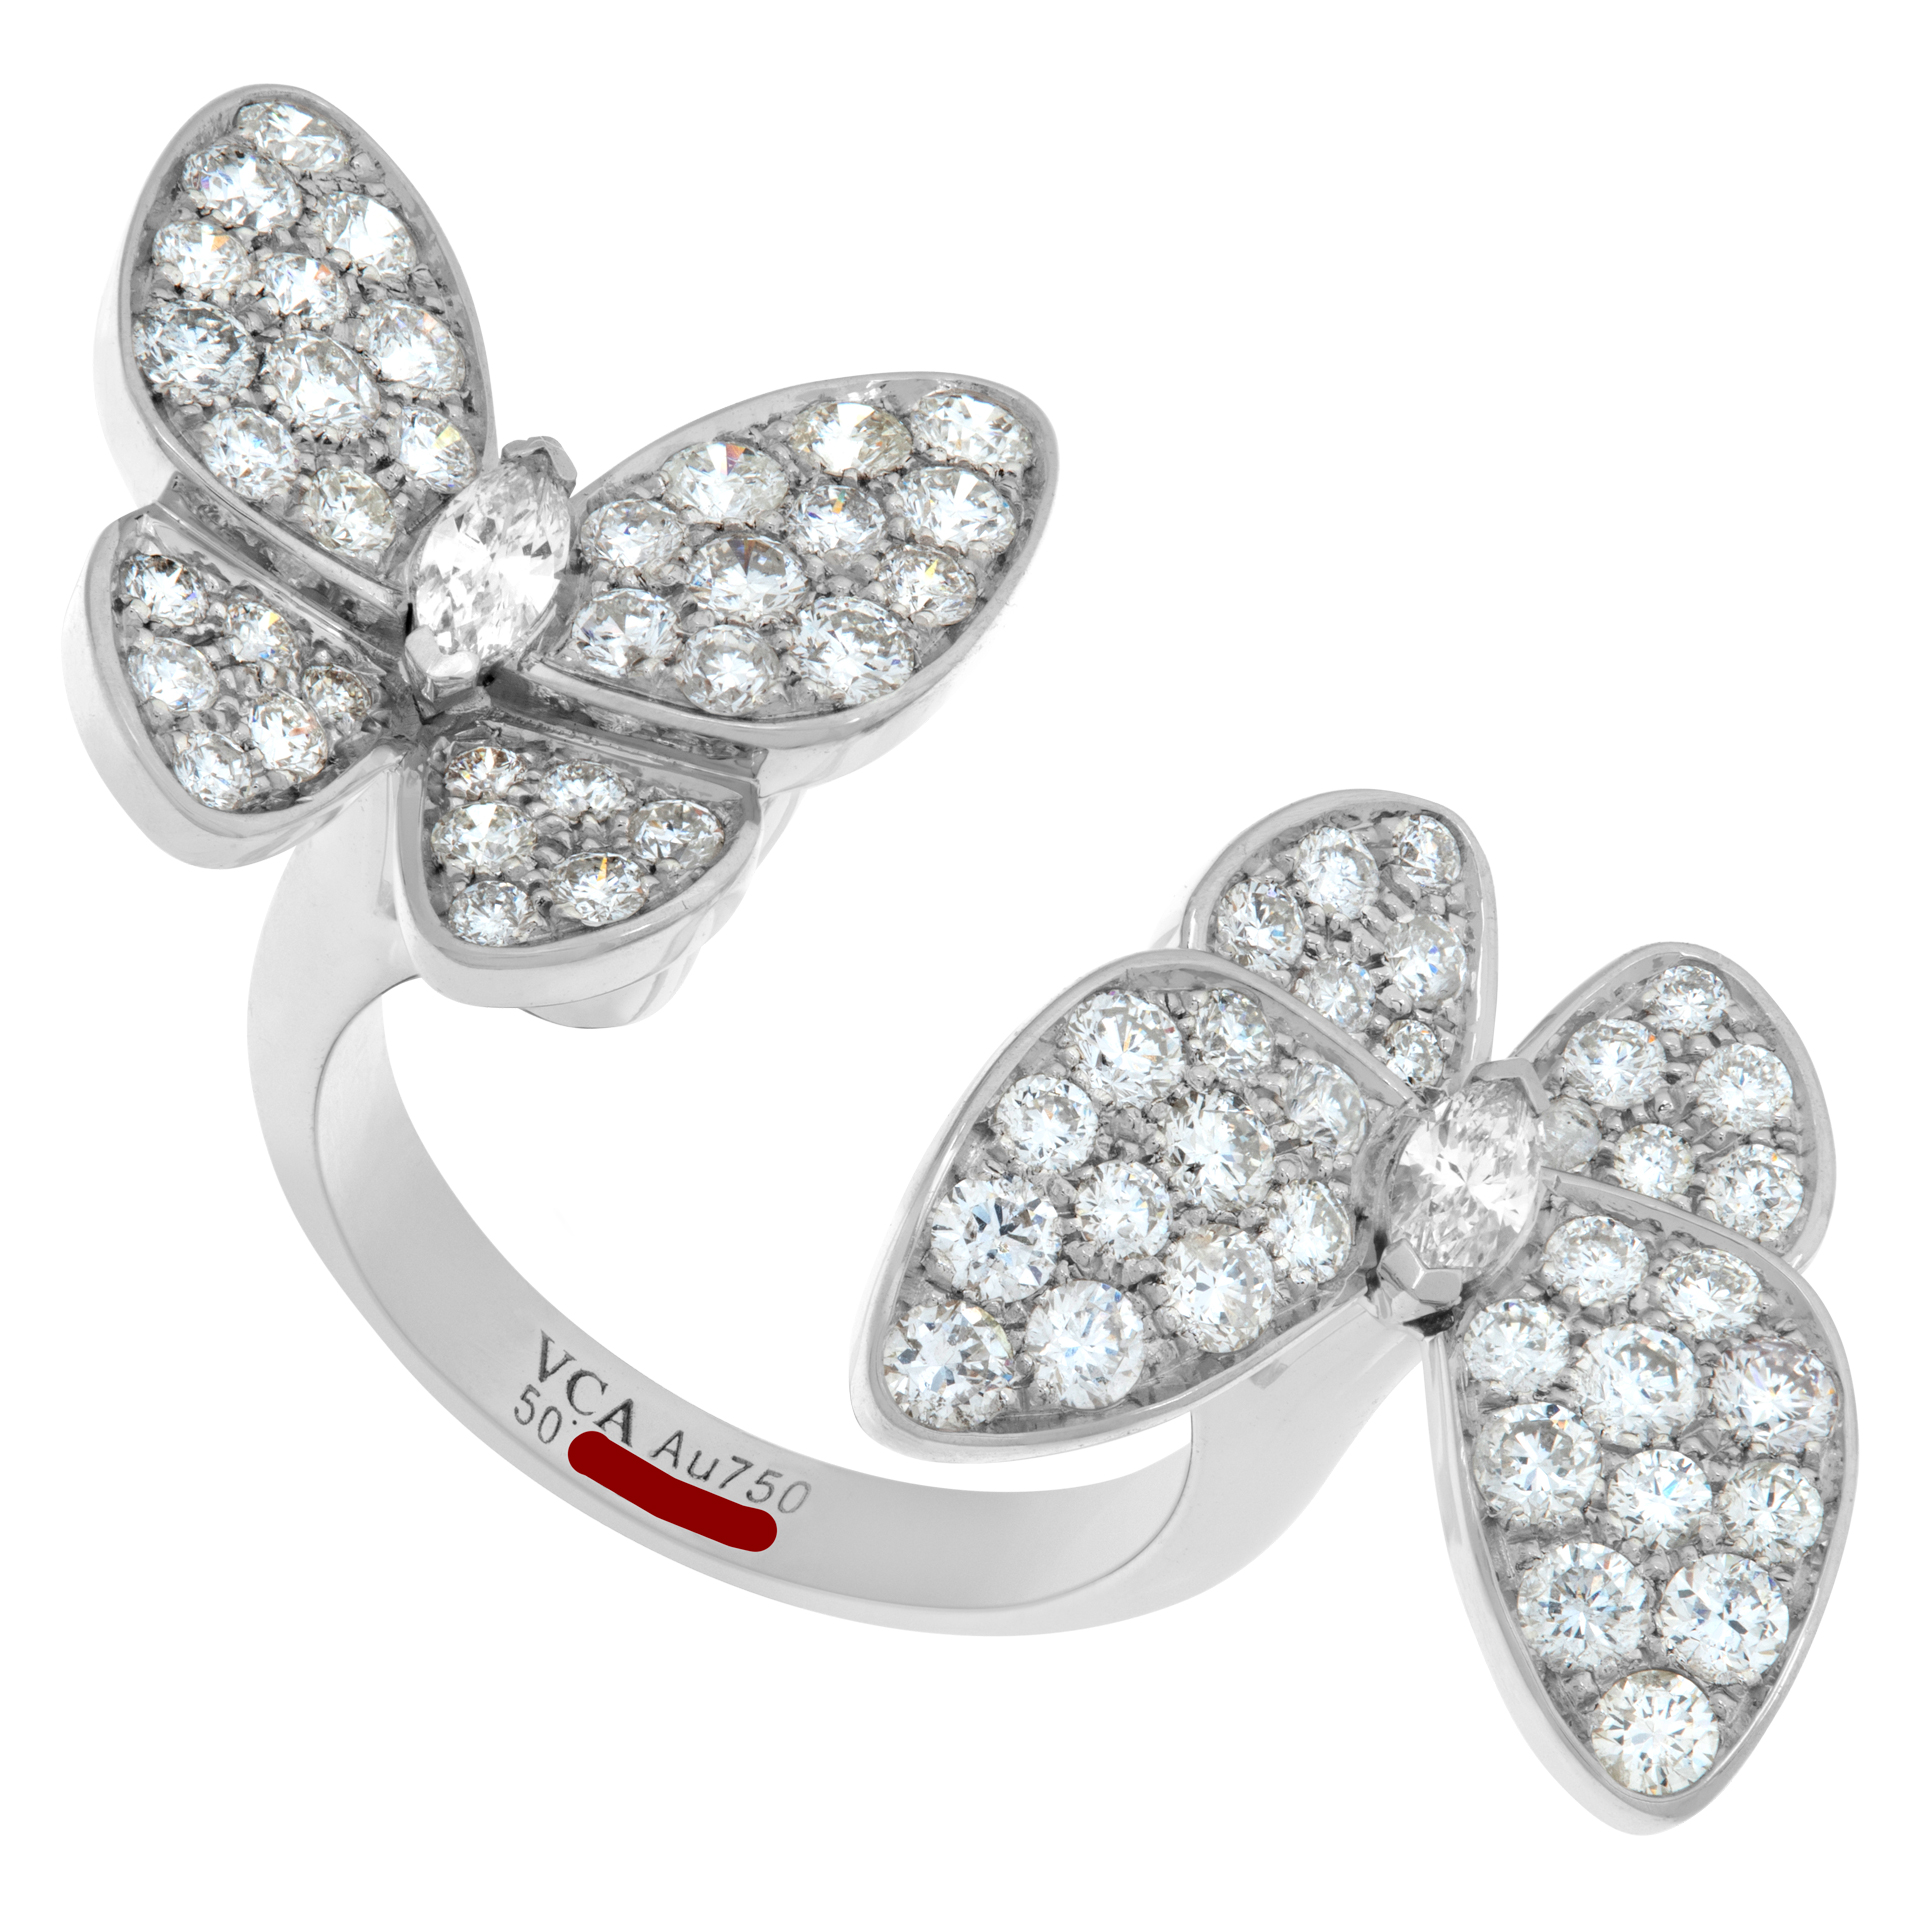 Van Cleef & Arpels Two Butterfly ring in 18k white gold with diamonds size 50 EUR image 1